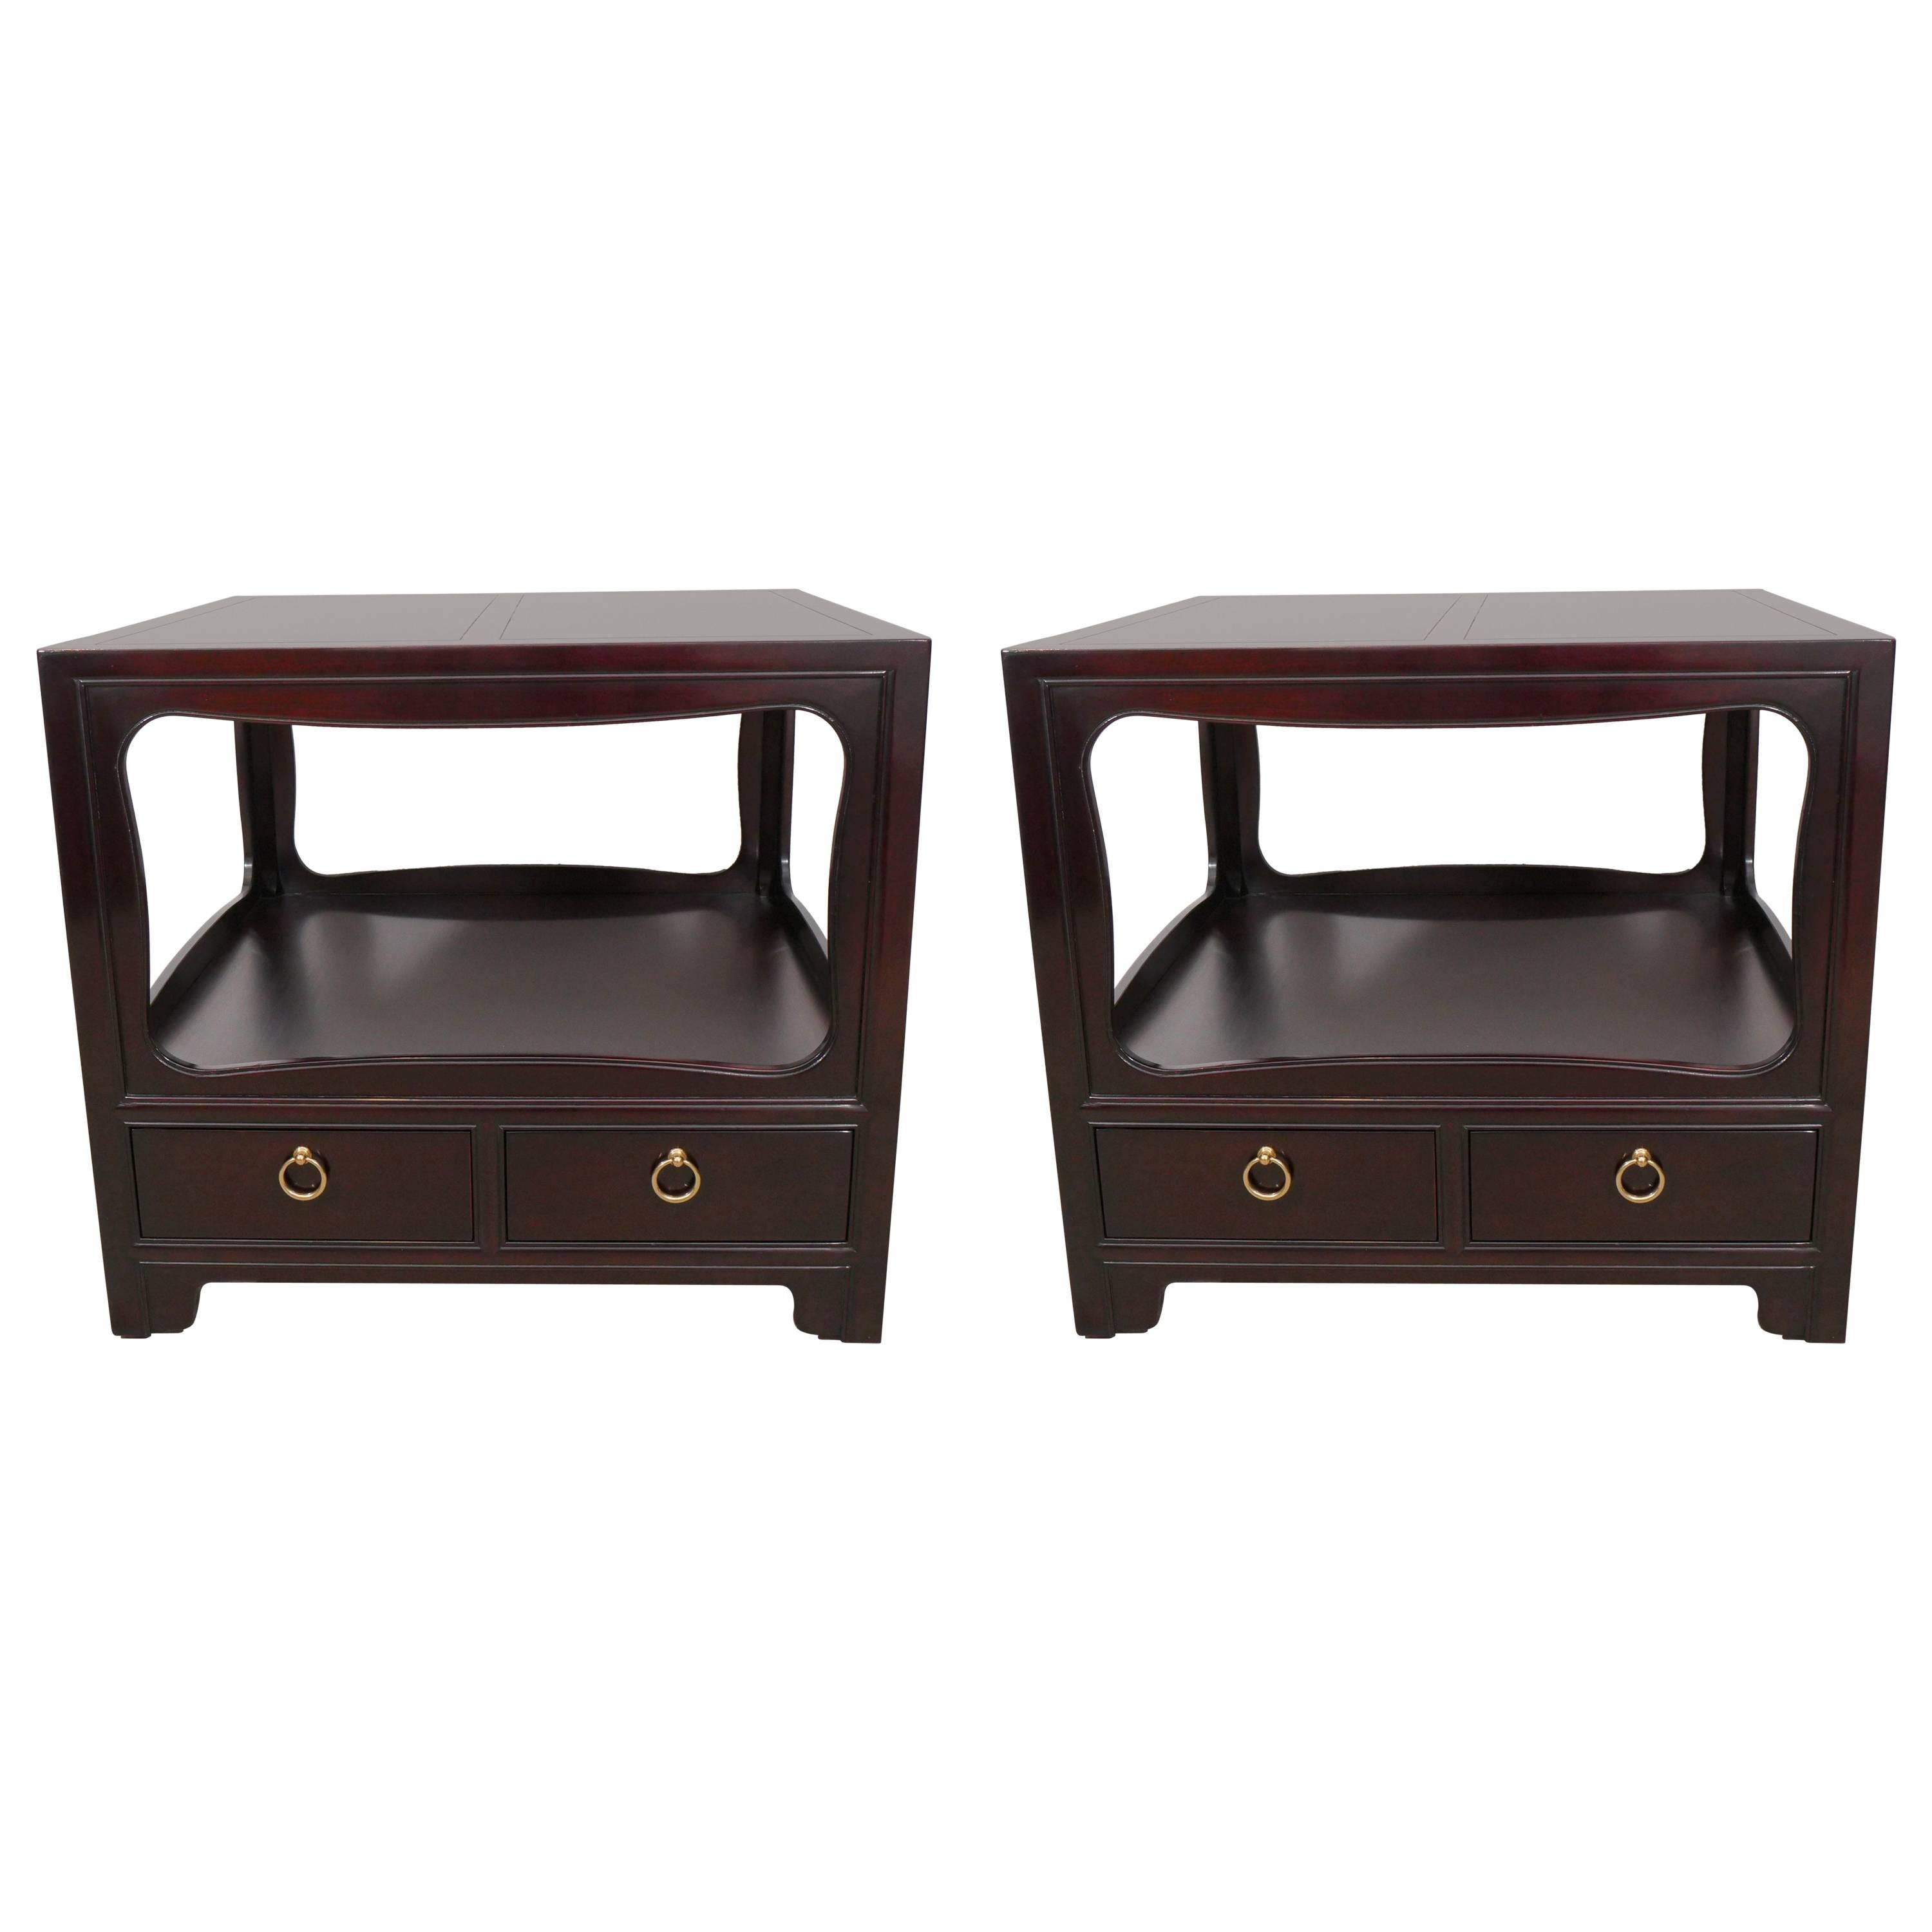 Pair of Mahogany End Tables by Michael Taylor for Baker